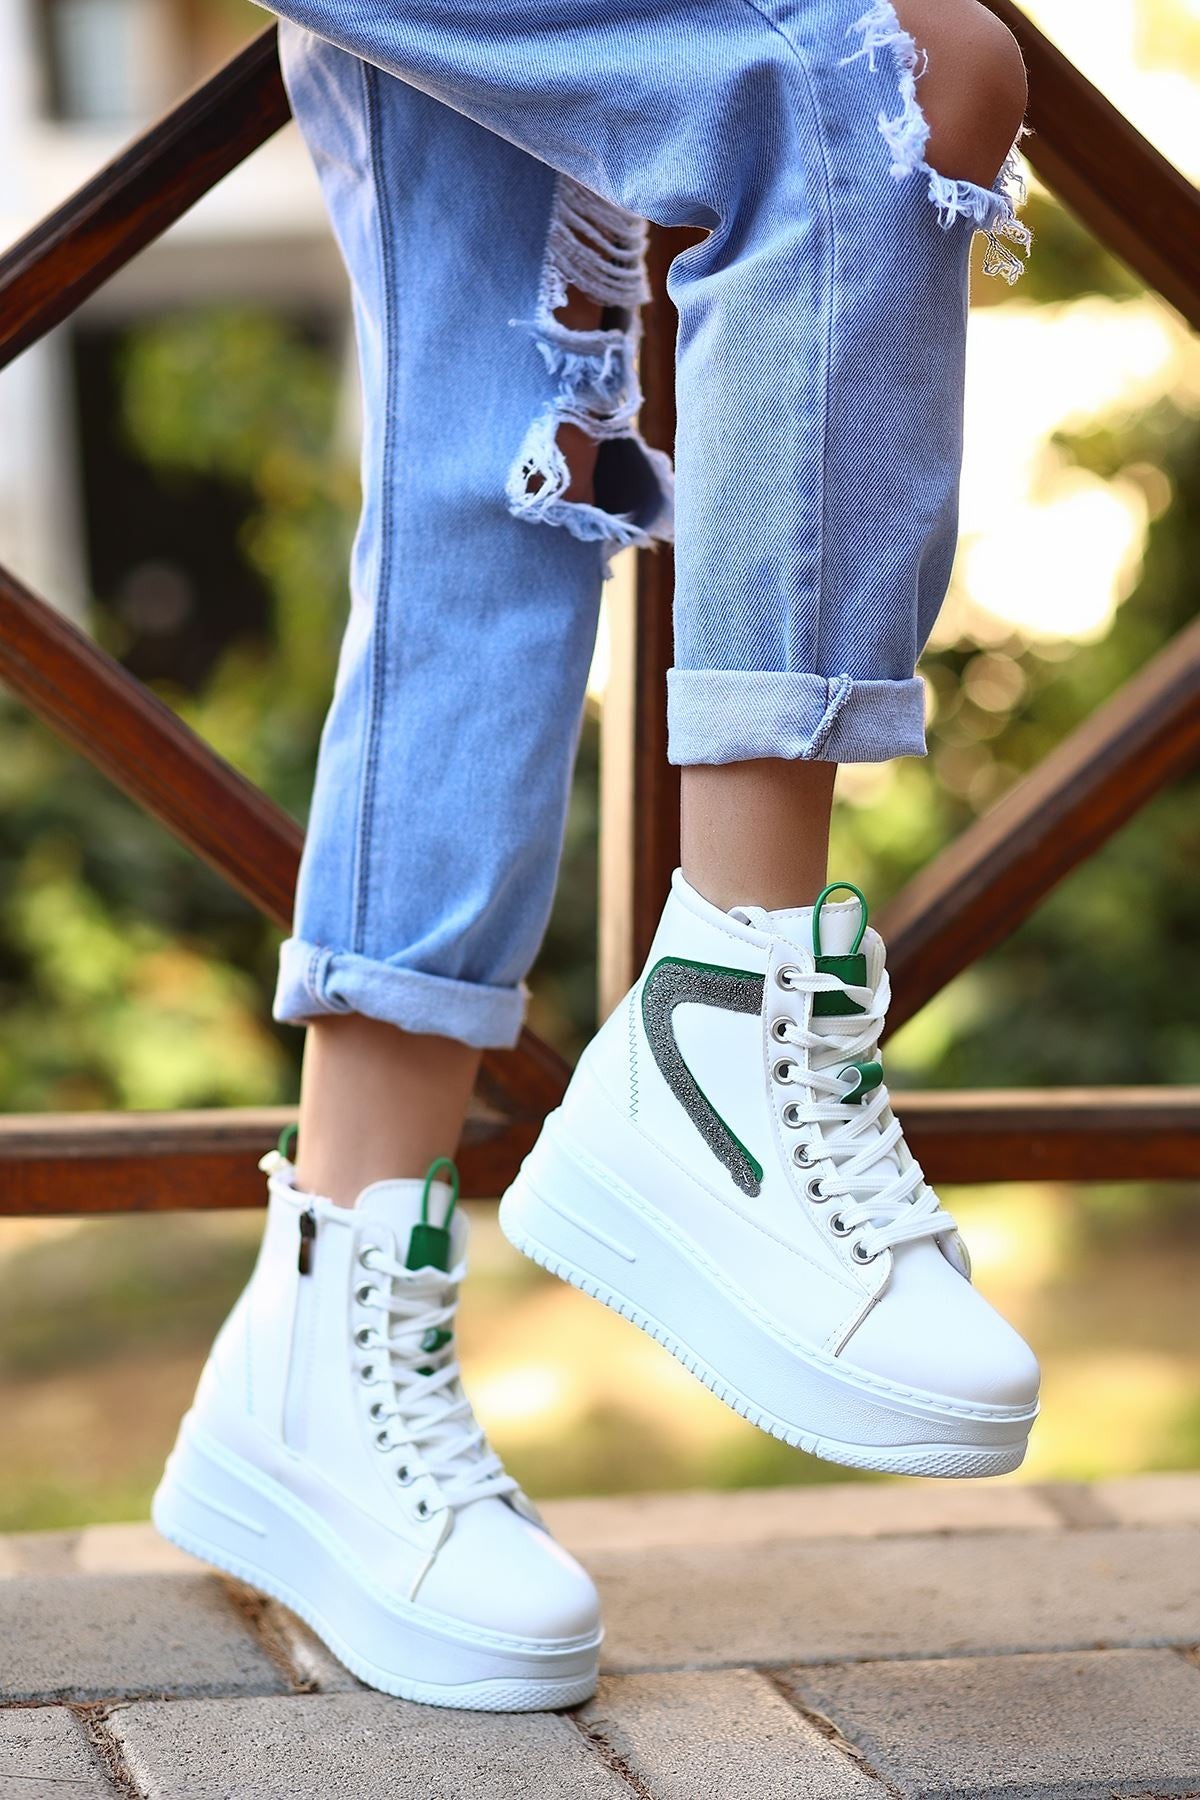 Women's Pone White Skin Green Detailed Lace Up Sneakers Boots - STREETMODE™